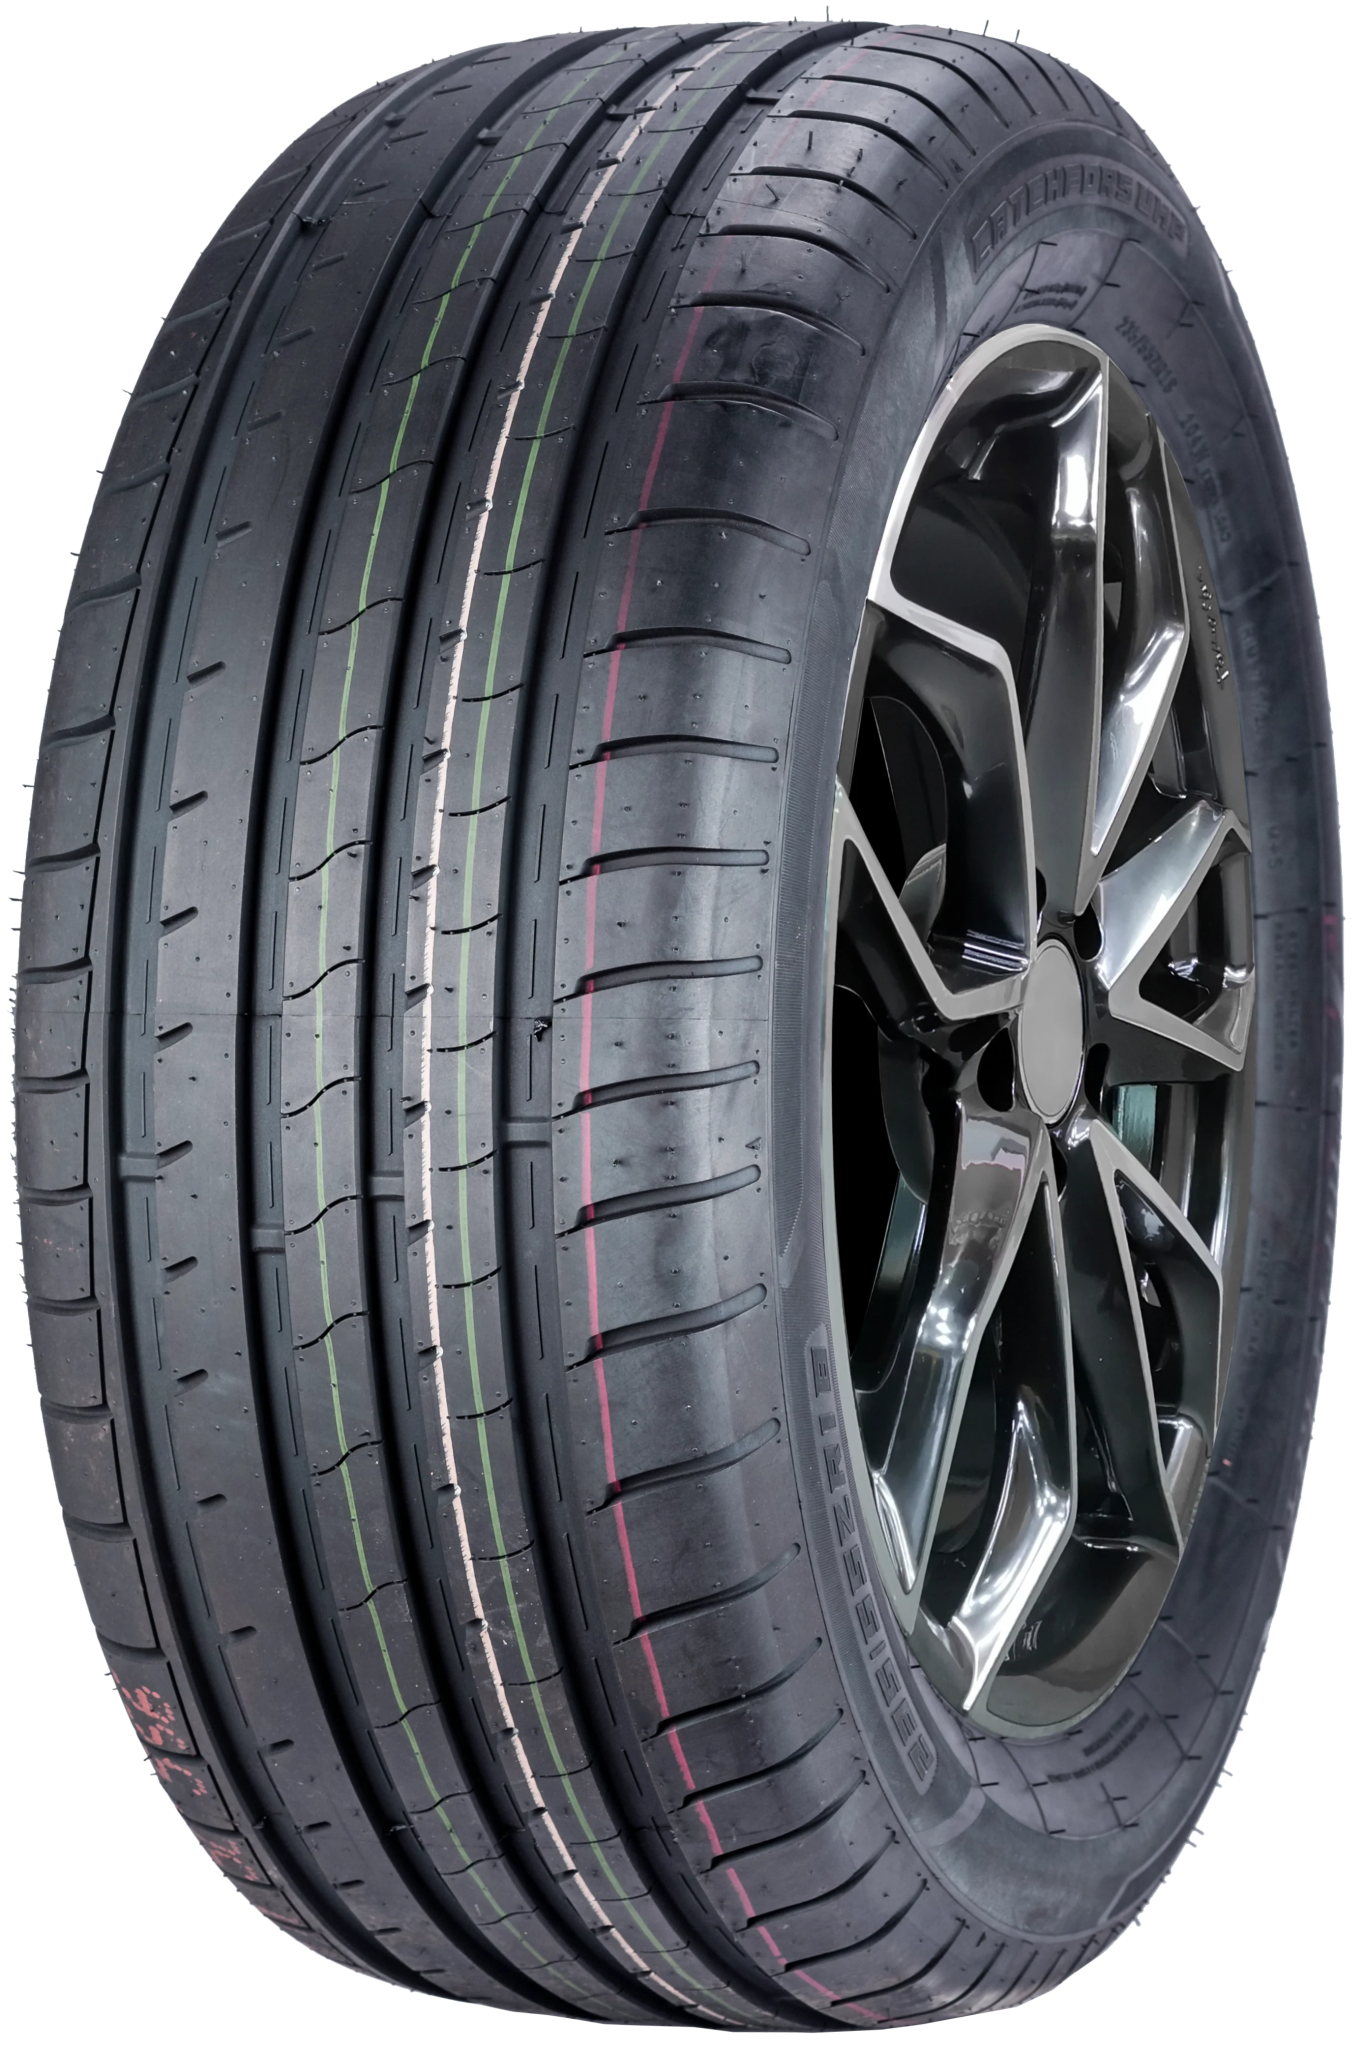 225/35R19 WINDFORCE CATCHFORS UHP PASSENGER - Toee Tire